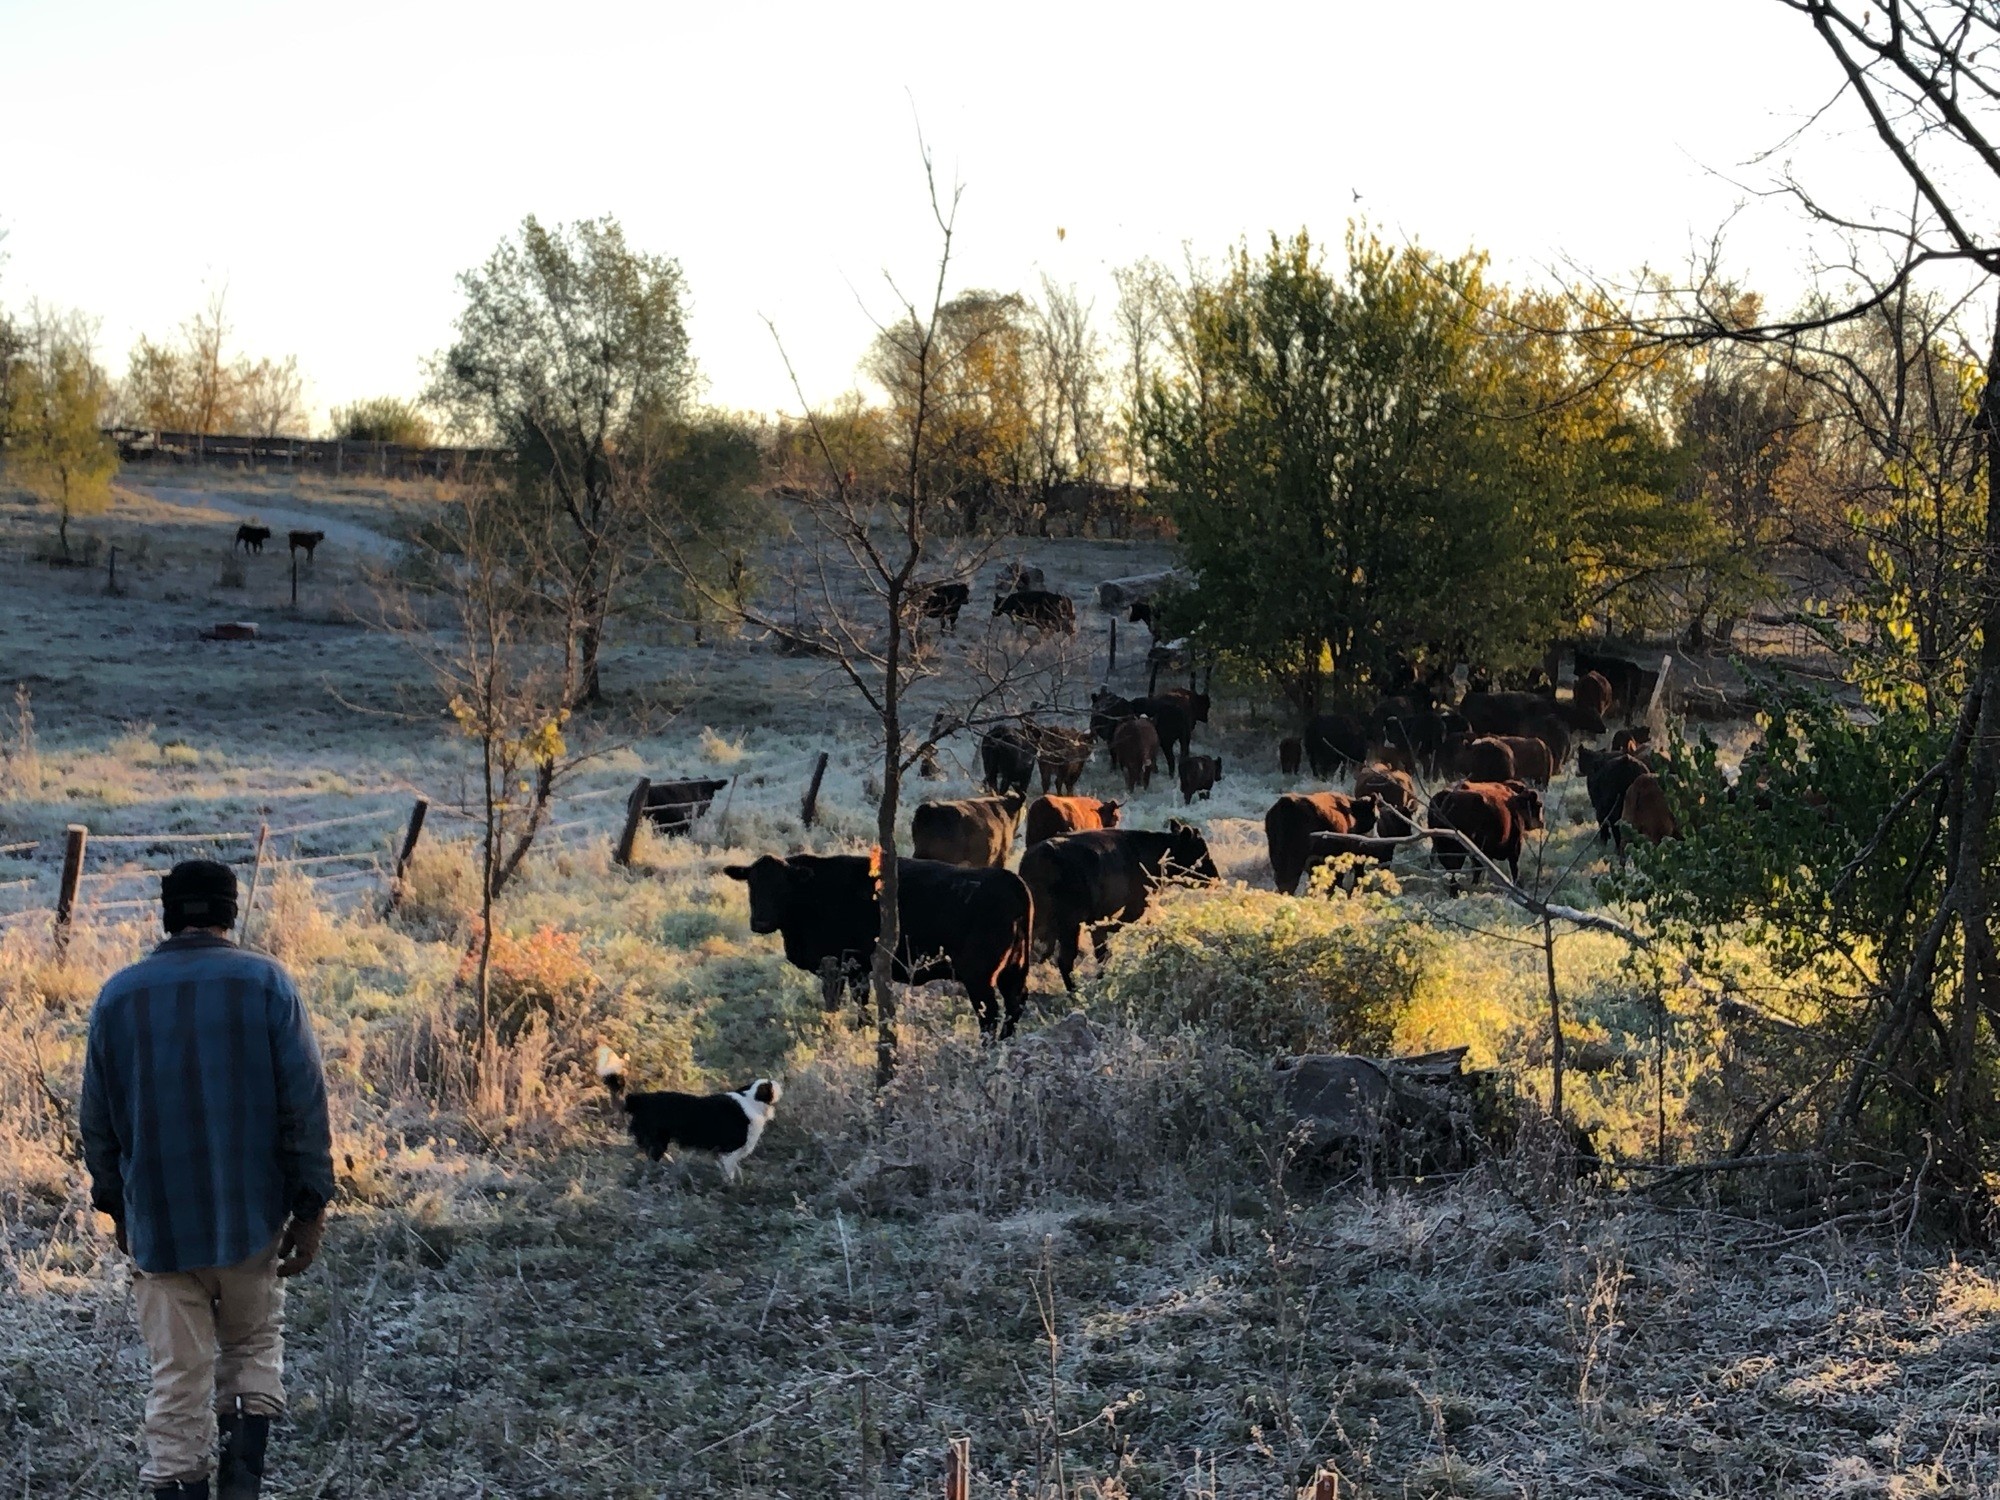 Cows graze in between trees and by a fence while a farmer and a dog watch. November 2021